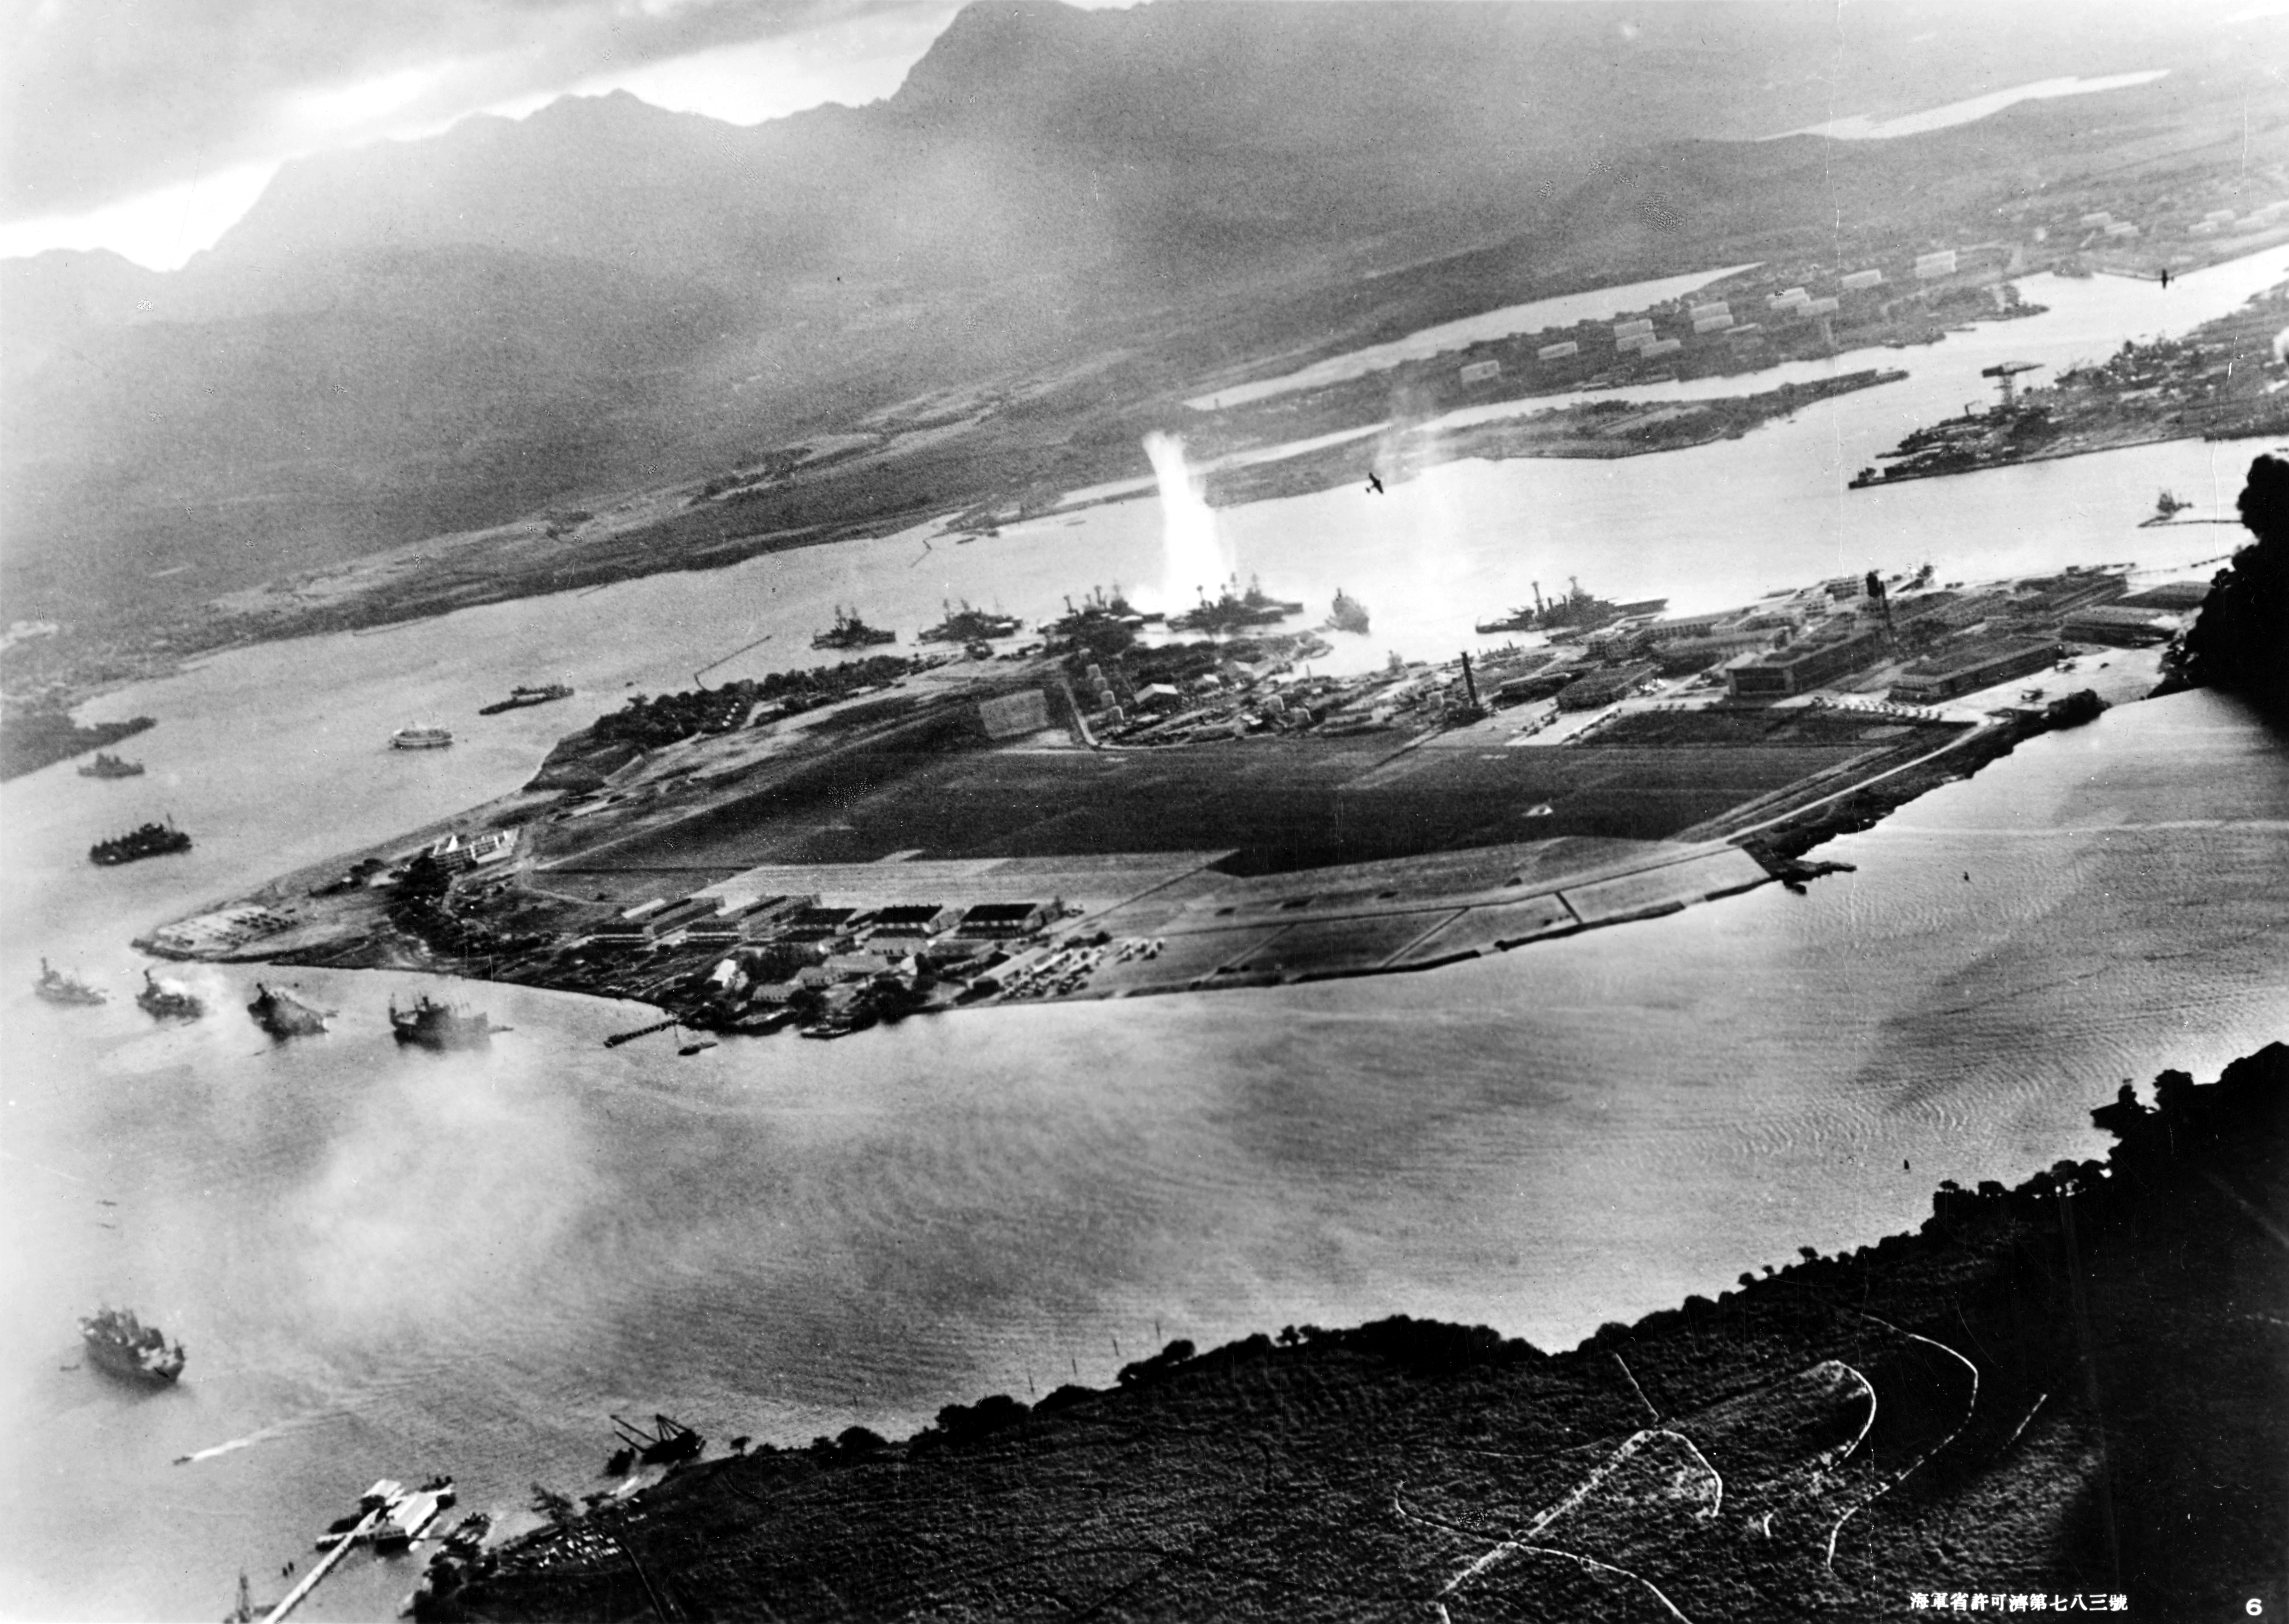 Explosions from the Attack on Pearl Harbor, shown from a Japanese plane's view